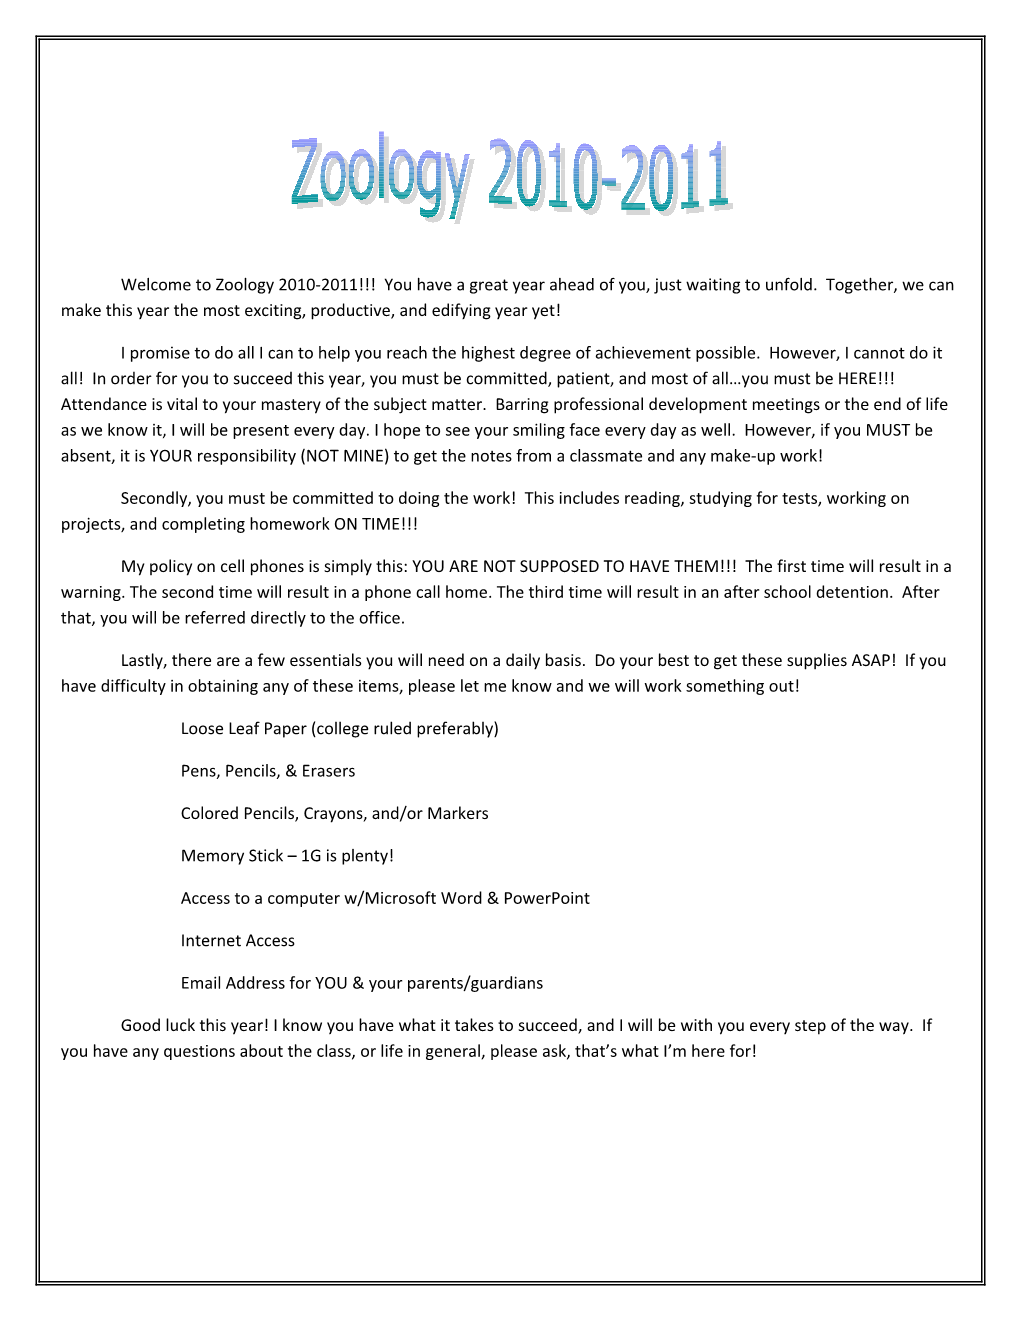 Welcome to Zoology 2010-2011 You Have a Great Year Ahead of You, Just Waiting to Unfold